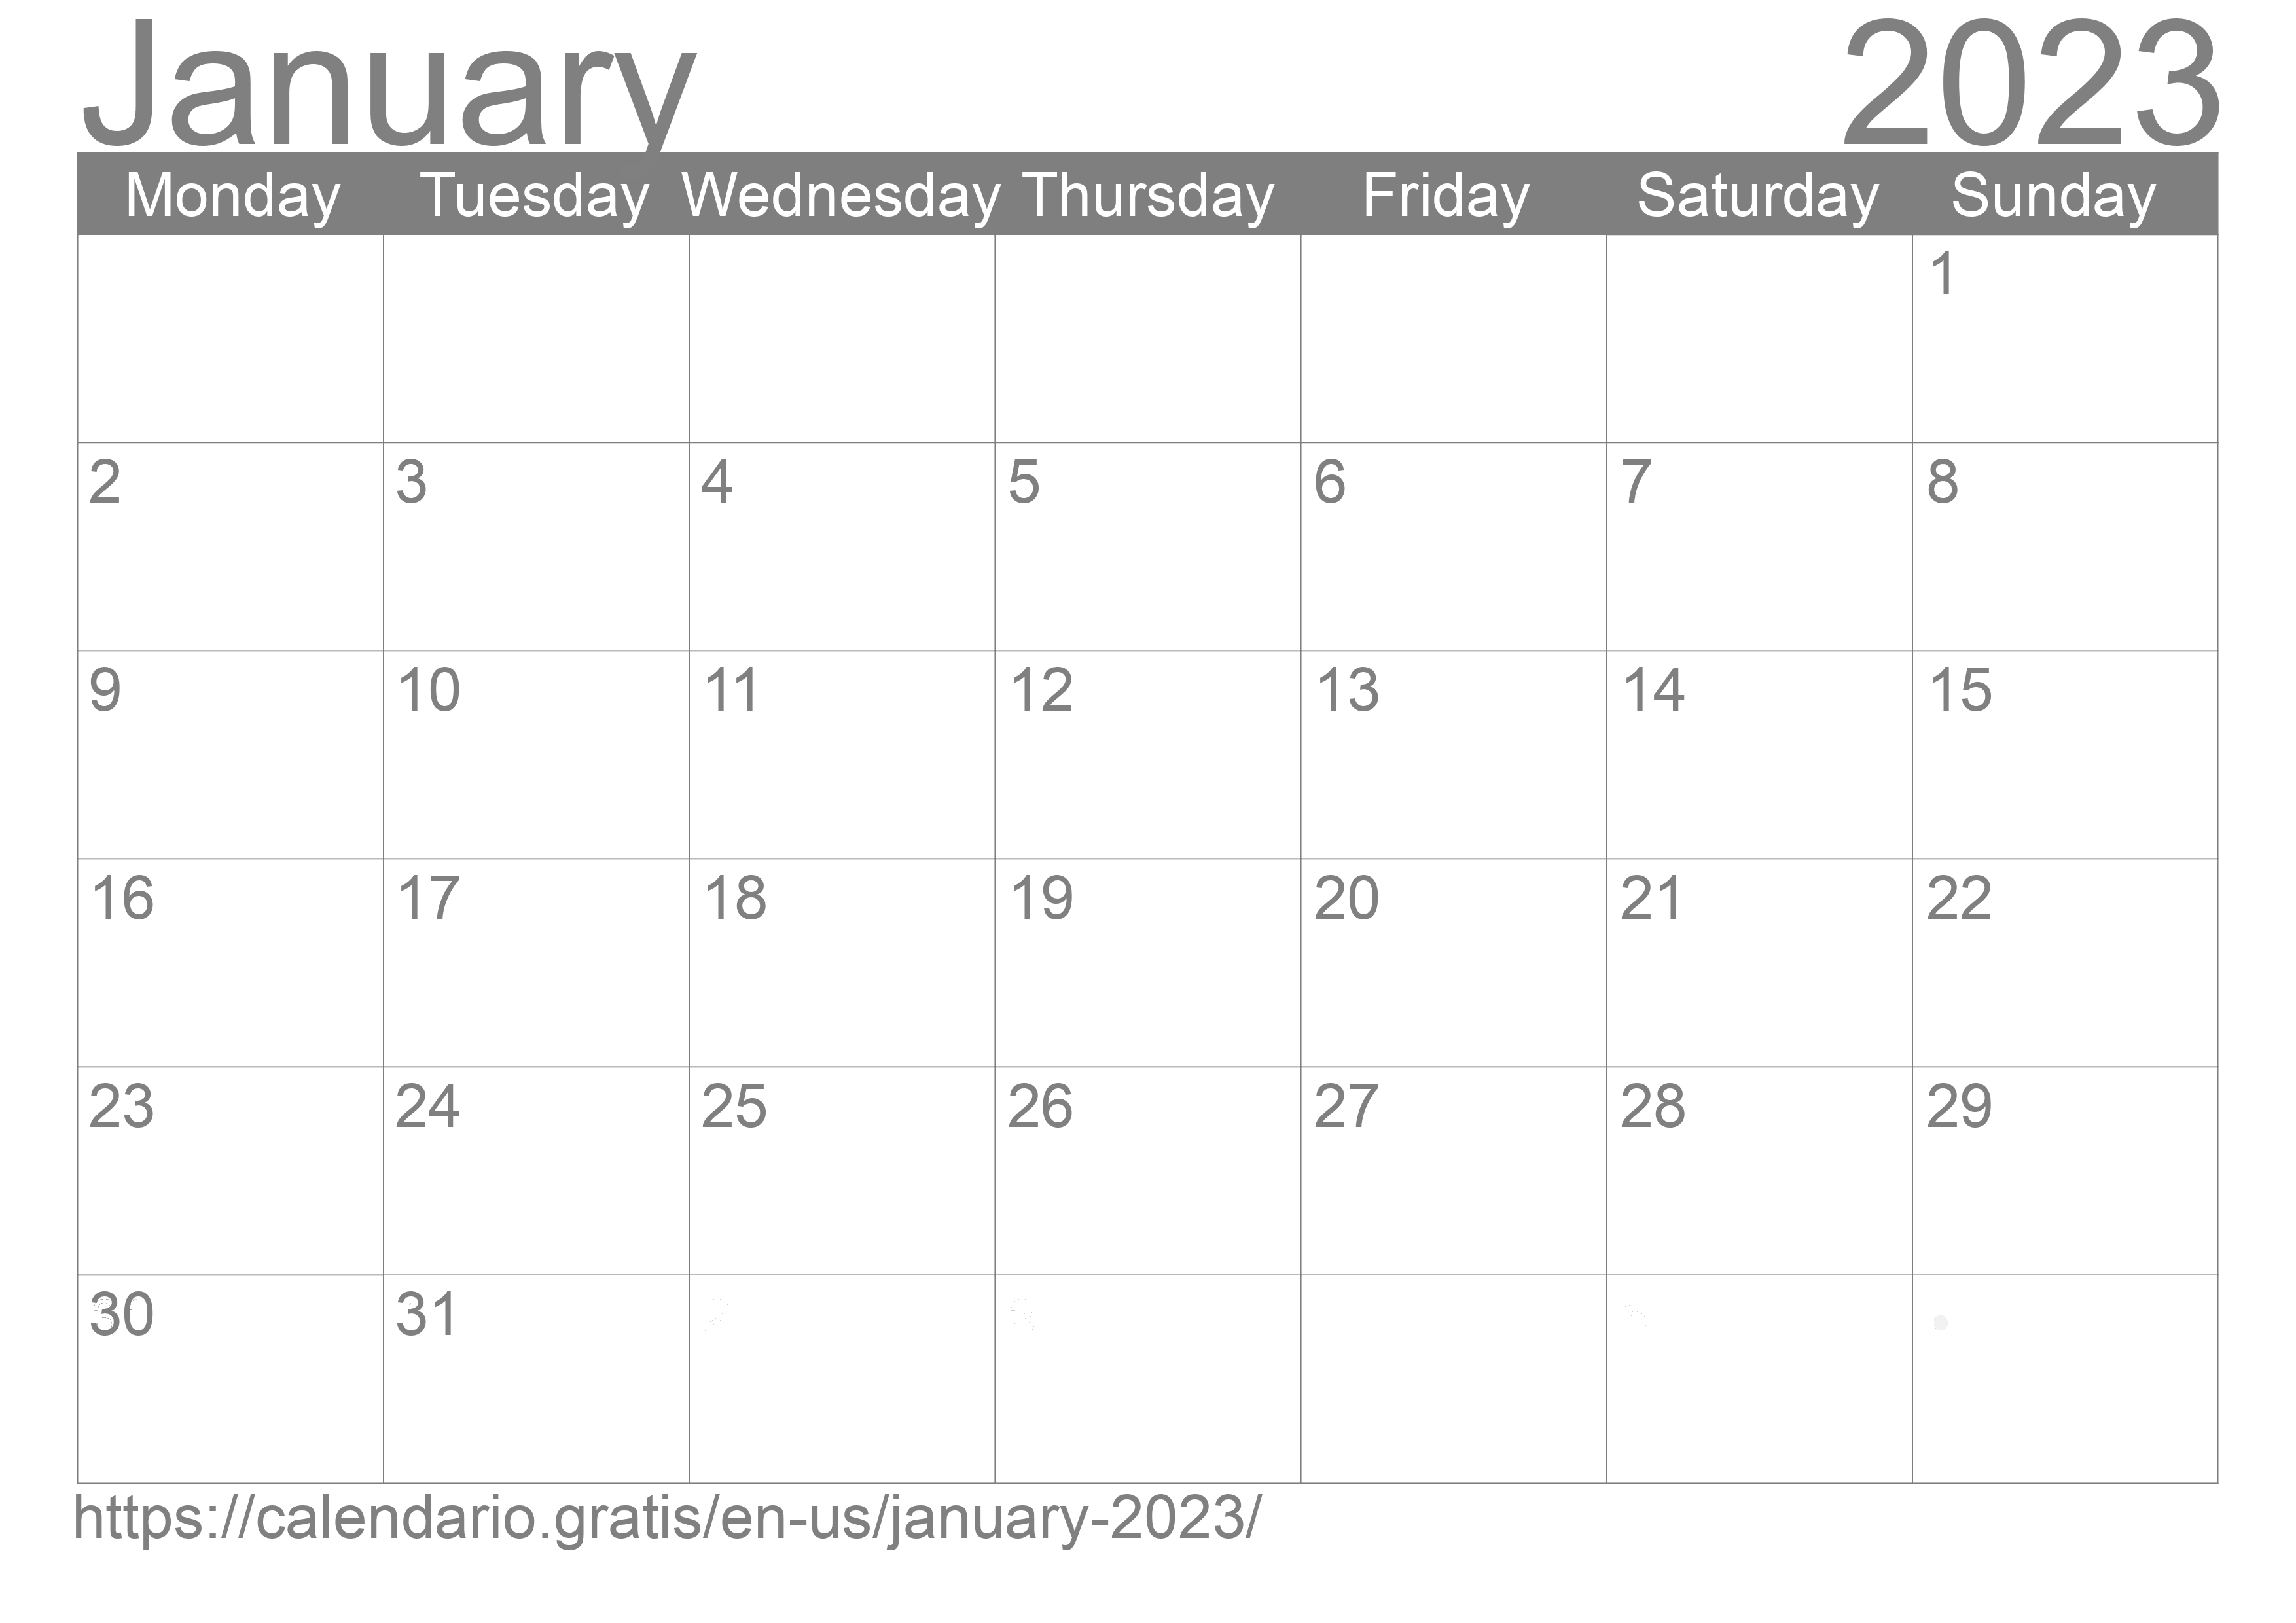 calendar-january-2023-from-united-states-of-america-in-english